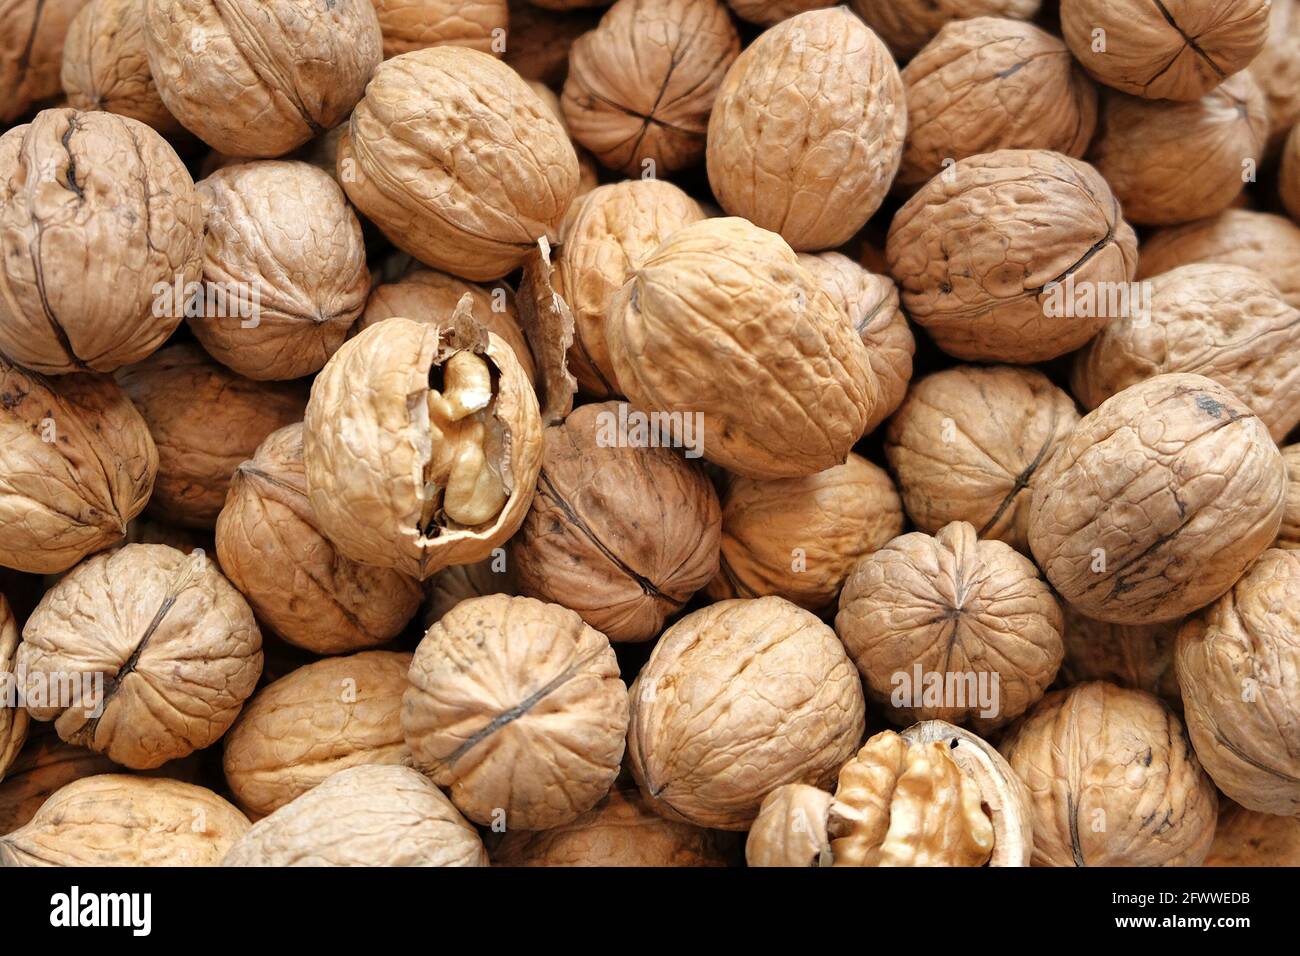 Walnut kernels and whole walnuts on rustic old wooden table. Stock Photo